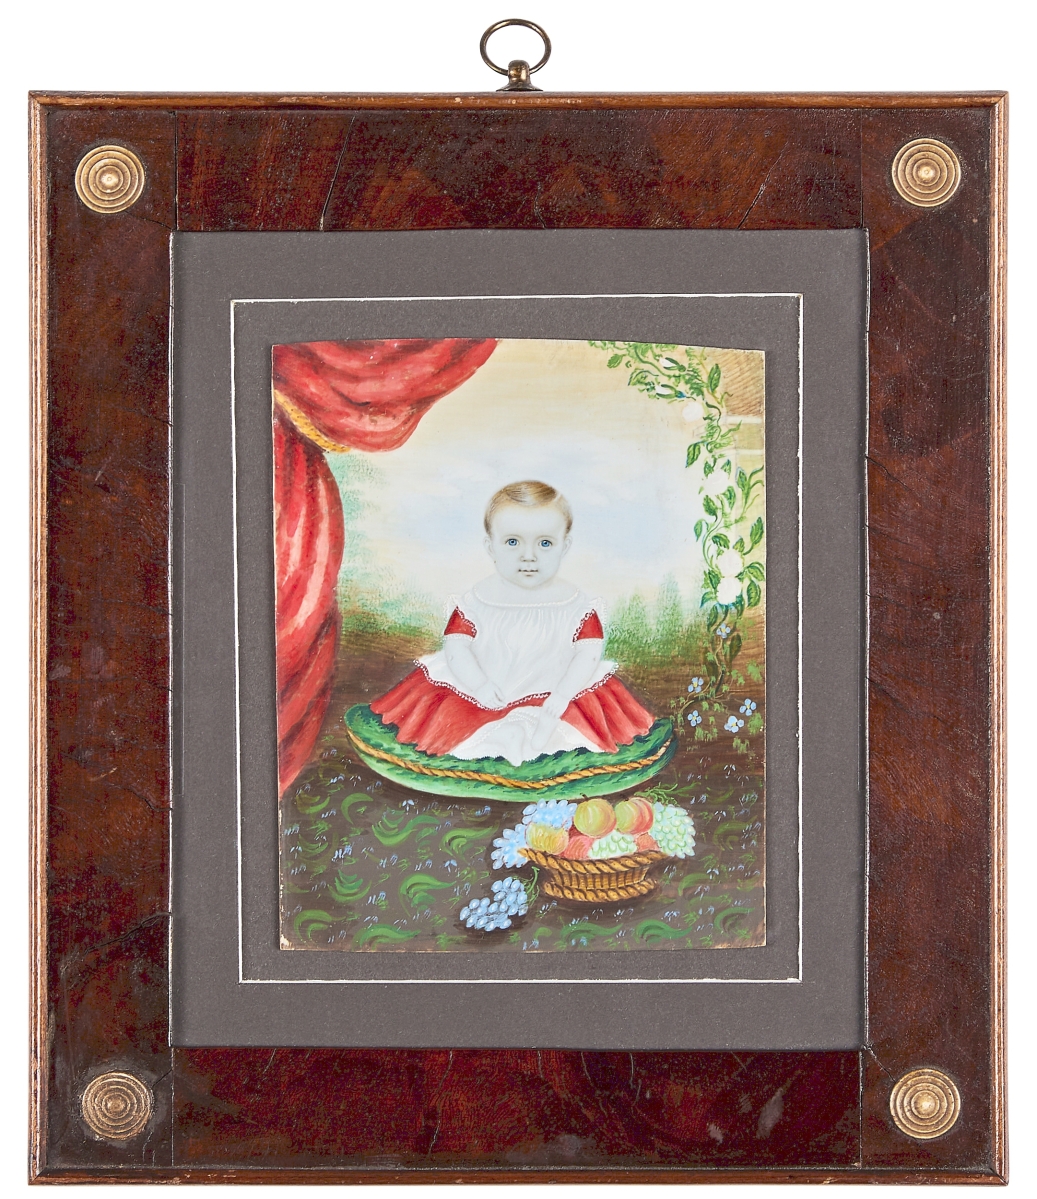 A private collector paid $40,320 — and the second highest price in the sale — for this miniature portrait of a boy in a red dress by Mrs Moses B. Russell ($5/10,000).